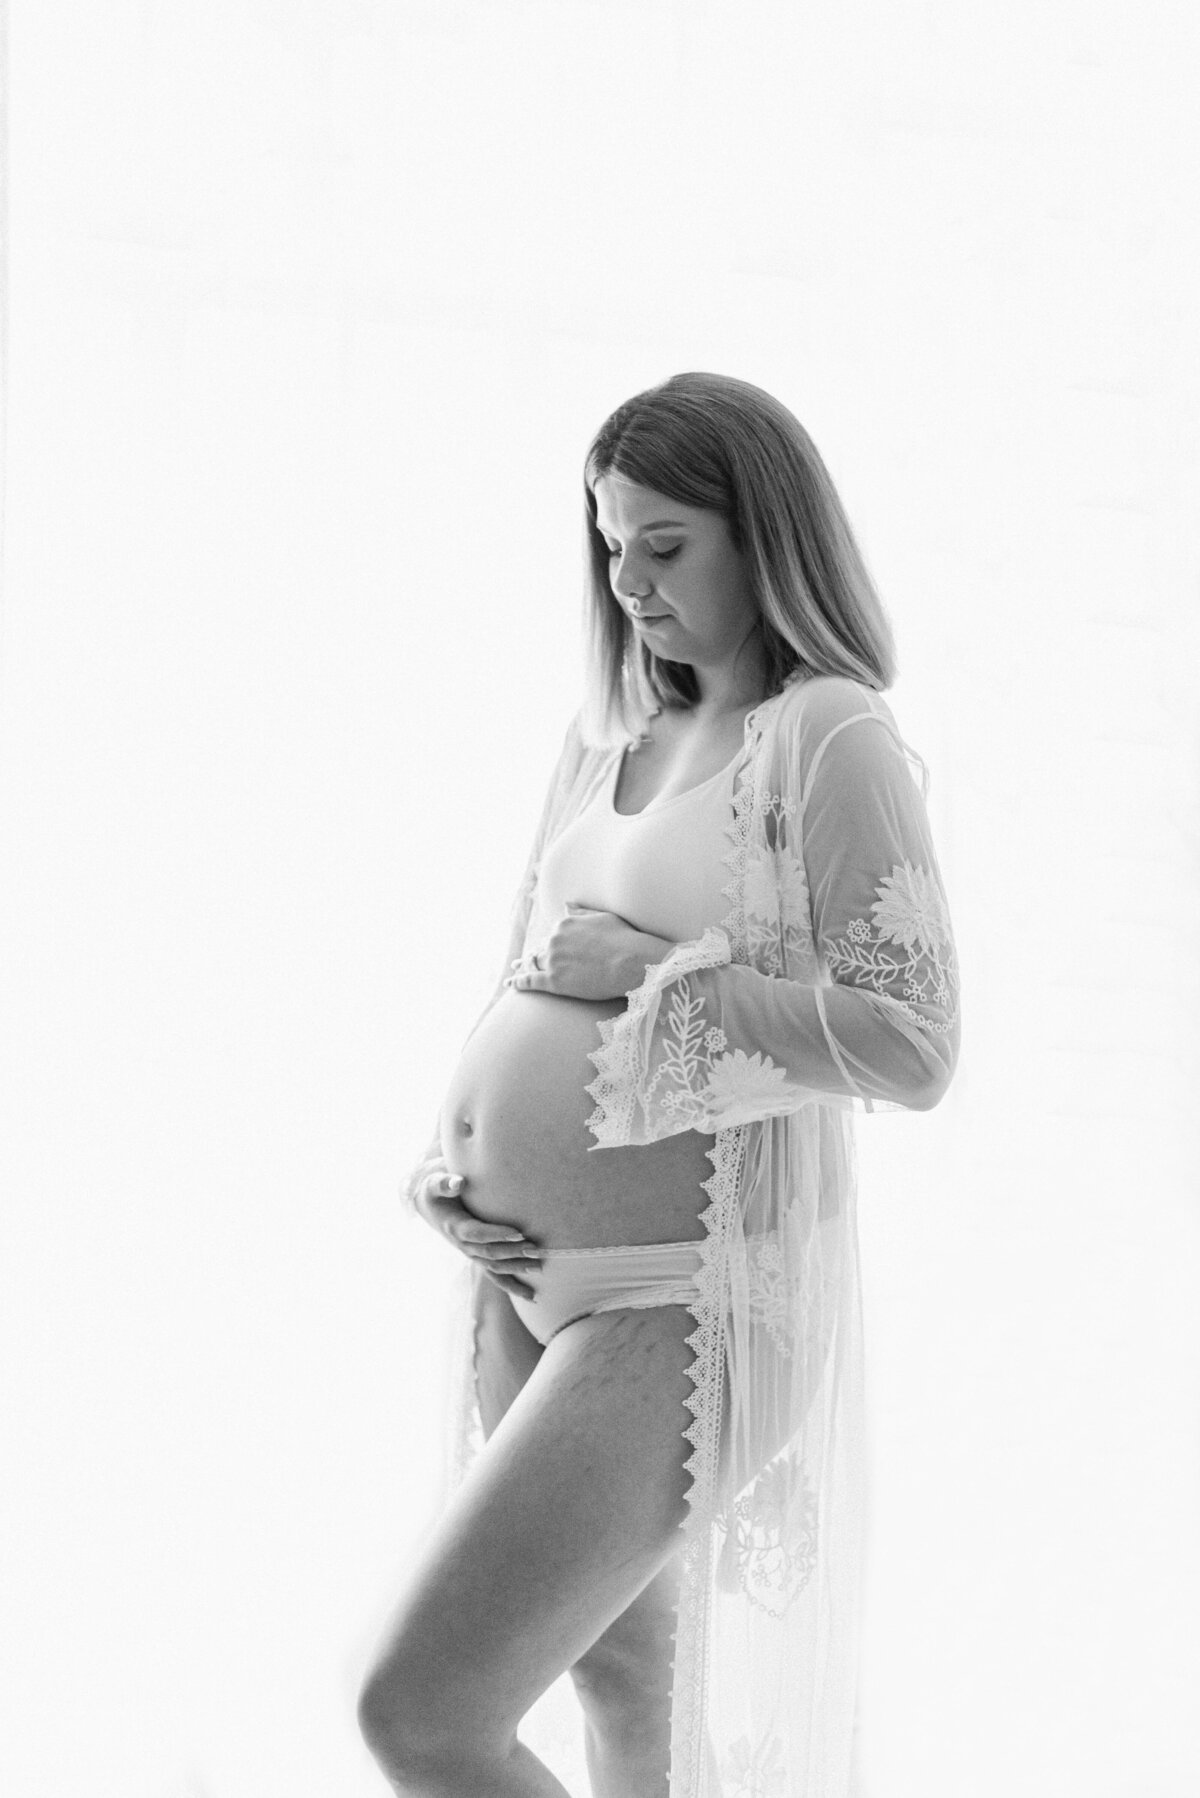 A expecting women holding her bump in all white Billingshurst maternity photography studio